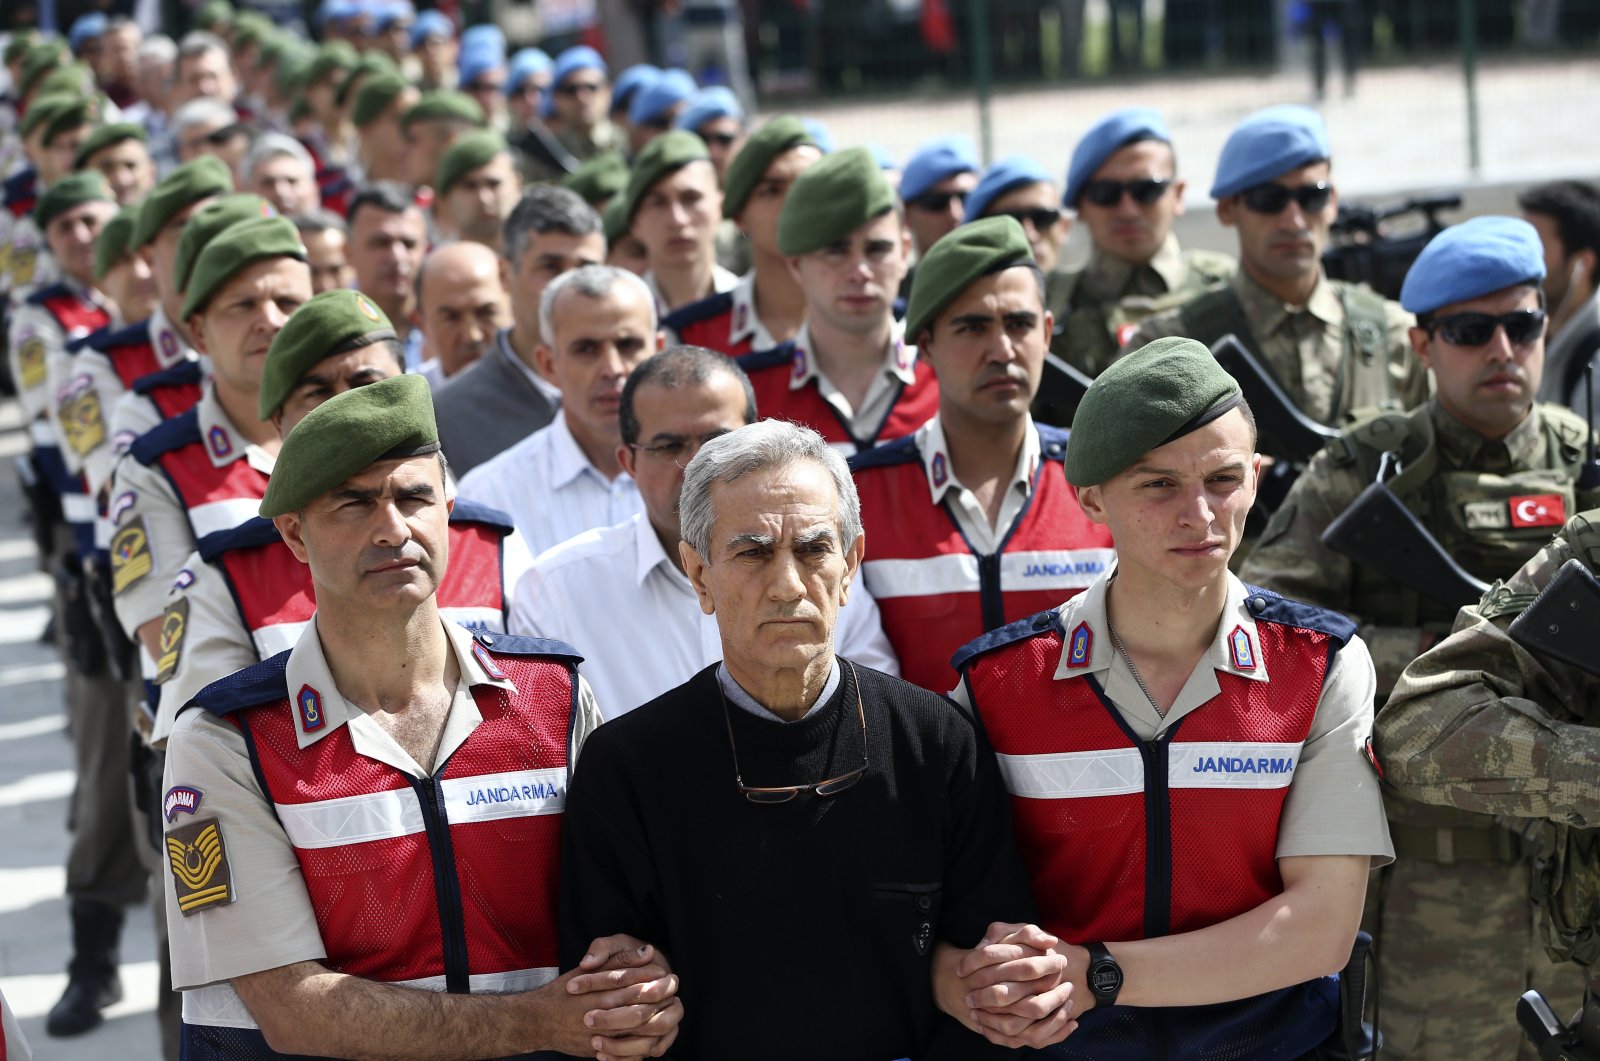 Former four-star Gen. Akın Öztürk, the highest-ranking military member involved in FETÖ's 2016 coup attempt, is escorted by soldiers to appear before a court in Ankara, Turkey, May 22, 2017. (AA Photo)